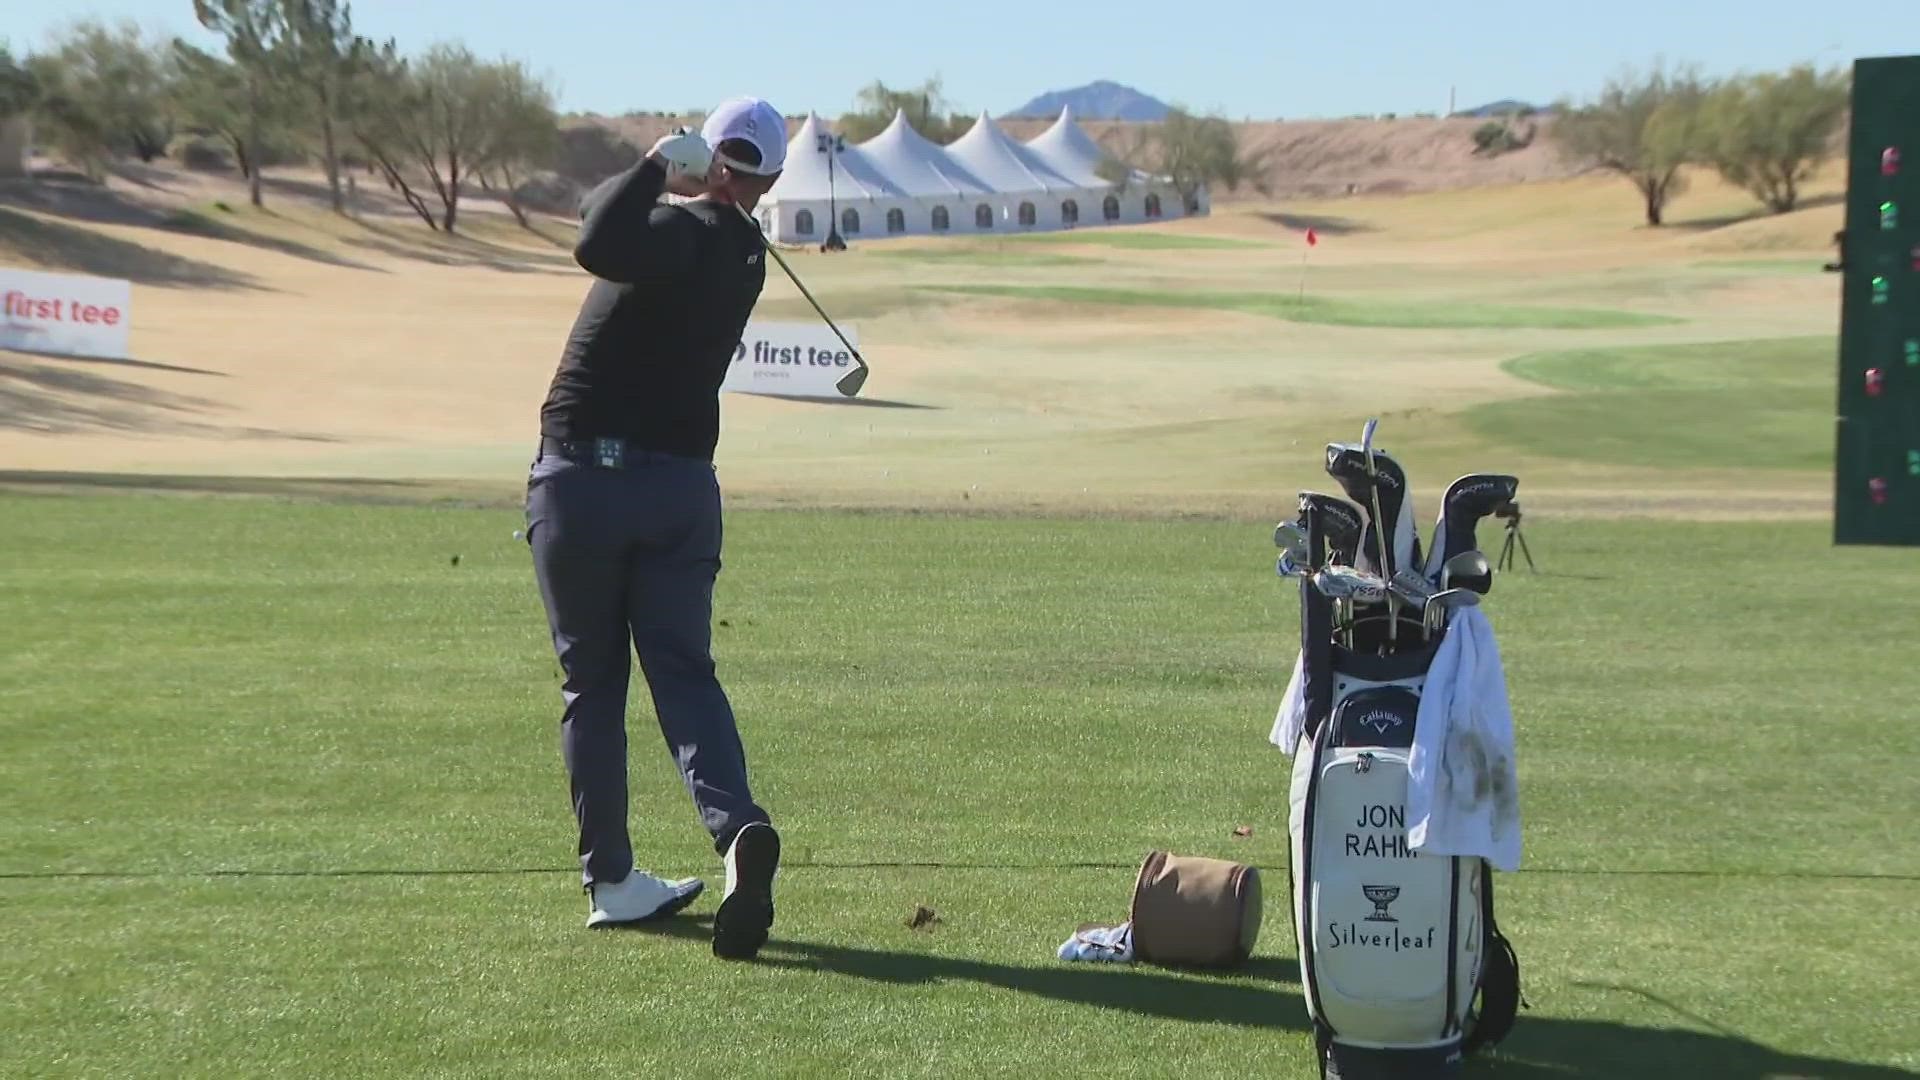 Celebrities and fans alike took part in the annual putting challenge at TPC Scottsdale.